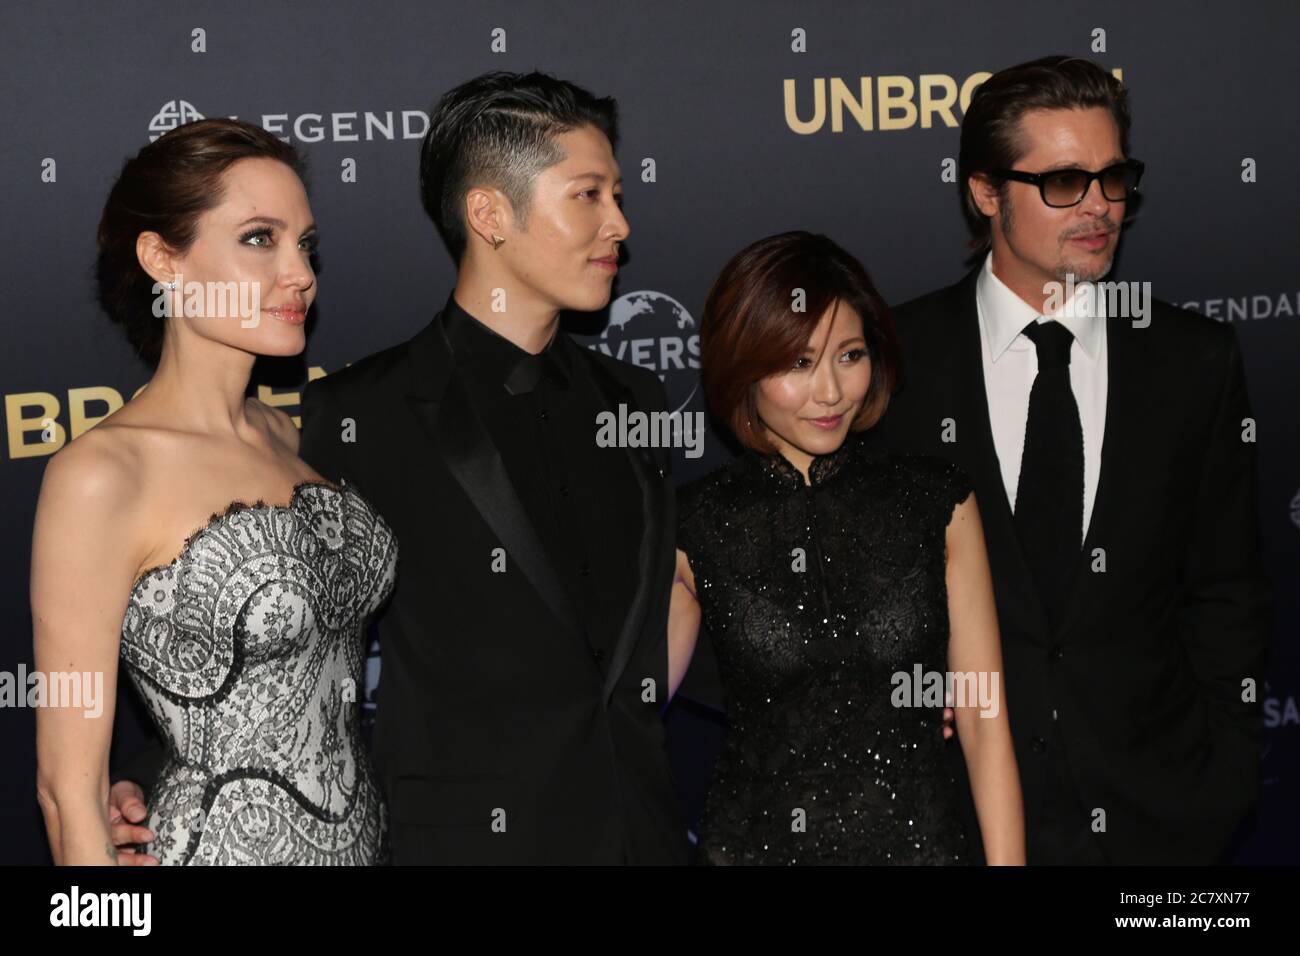 Unbroken producer and director Angelina Jolie with actor Miyavi, partner Melody Ishihara and Brad Pitt on the red carpet for the world premiere of ‘Un Stock Photo